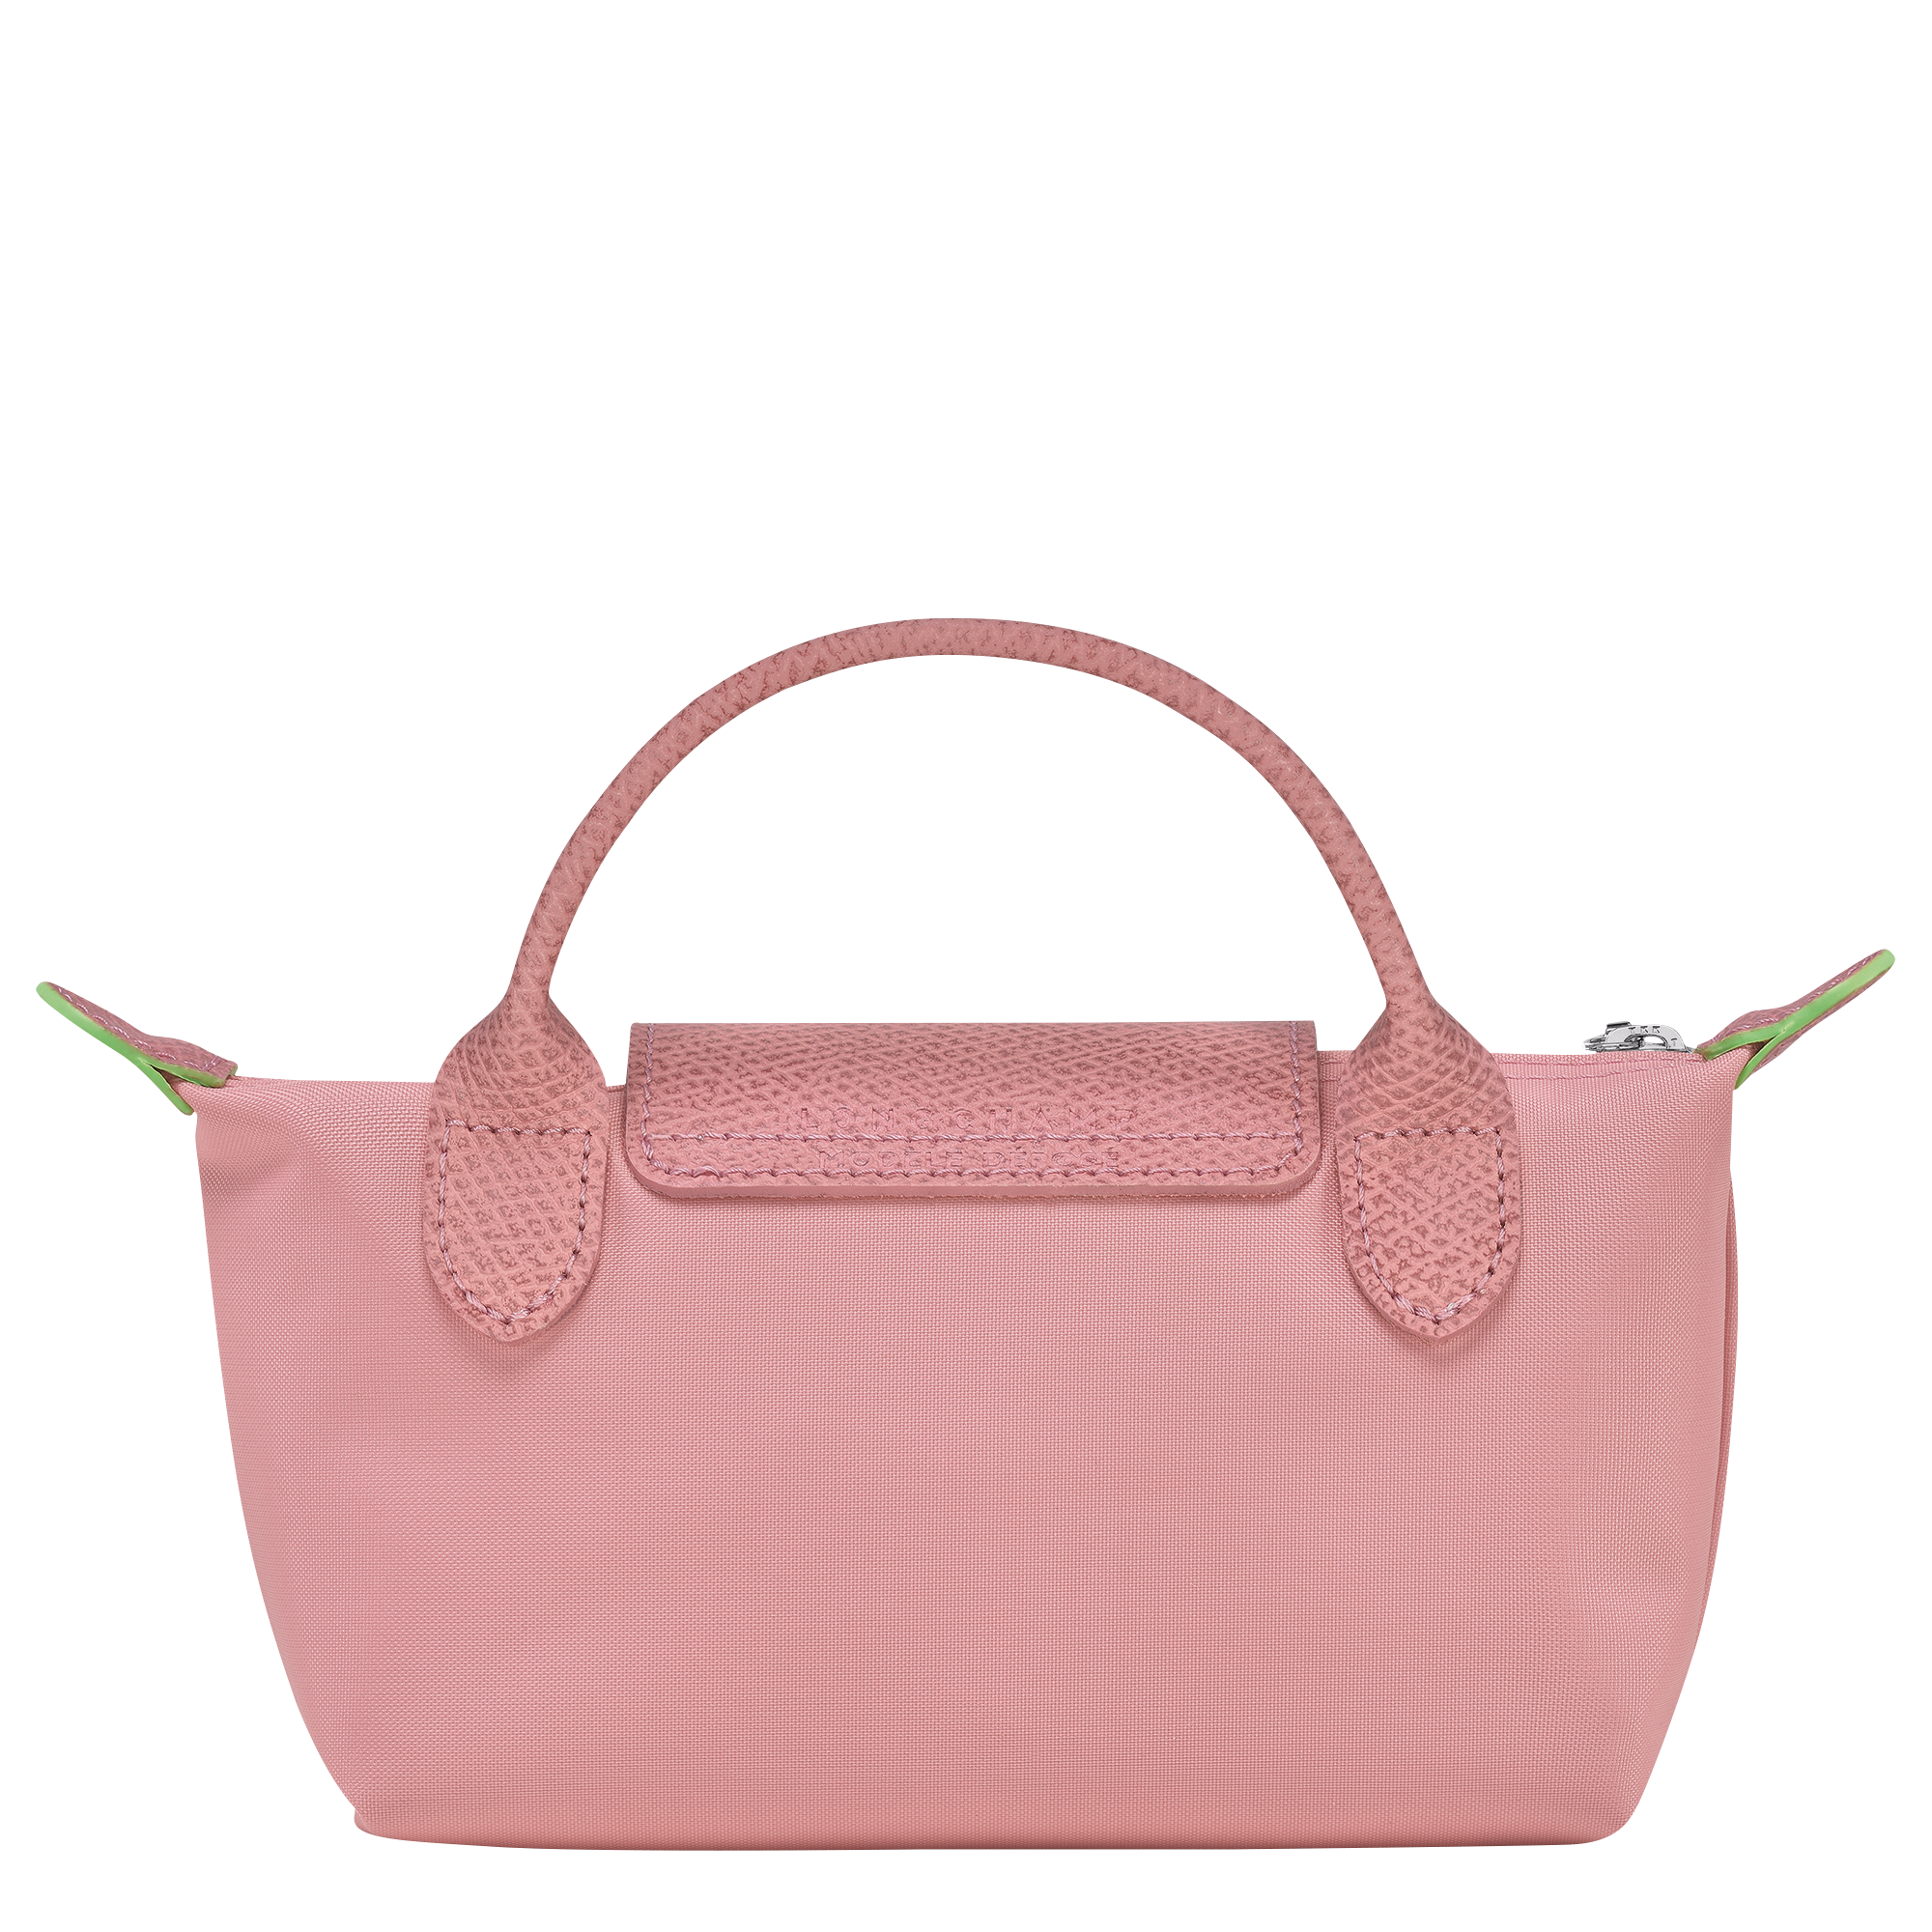 Longchamp LE PLIAGE GREEN - Pouch with handle in Petal Pink - 4 (SKU: 34175919P72)